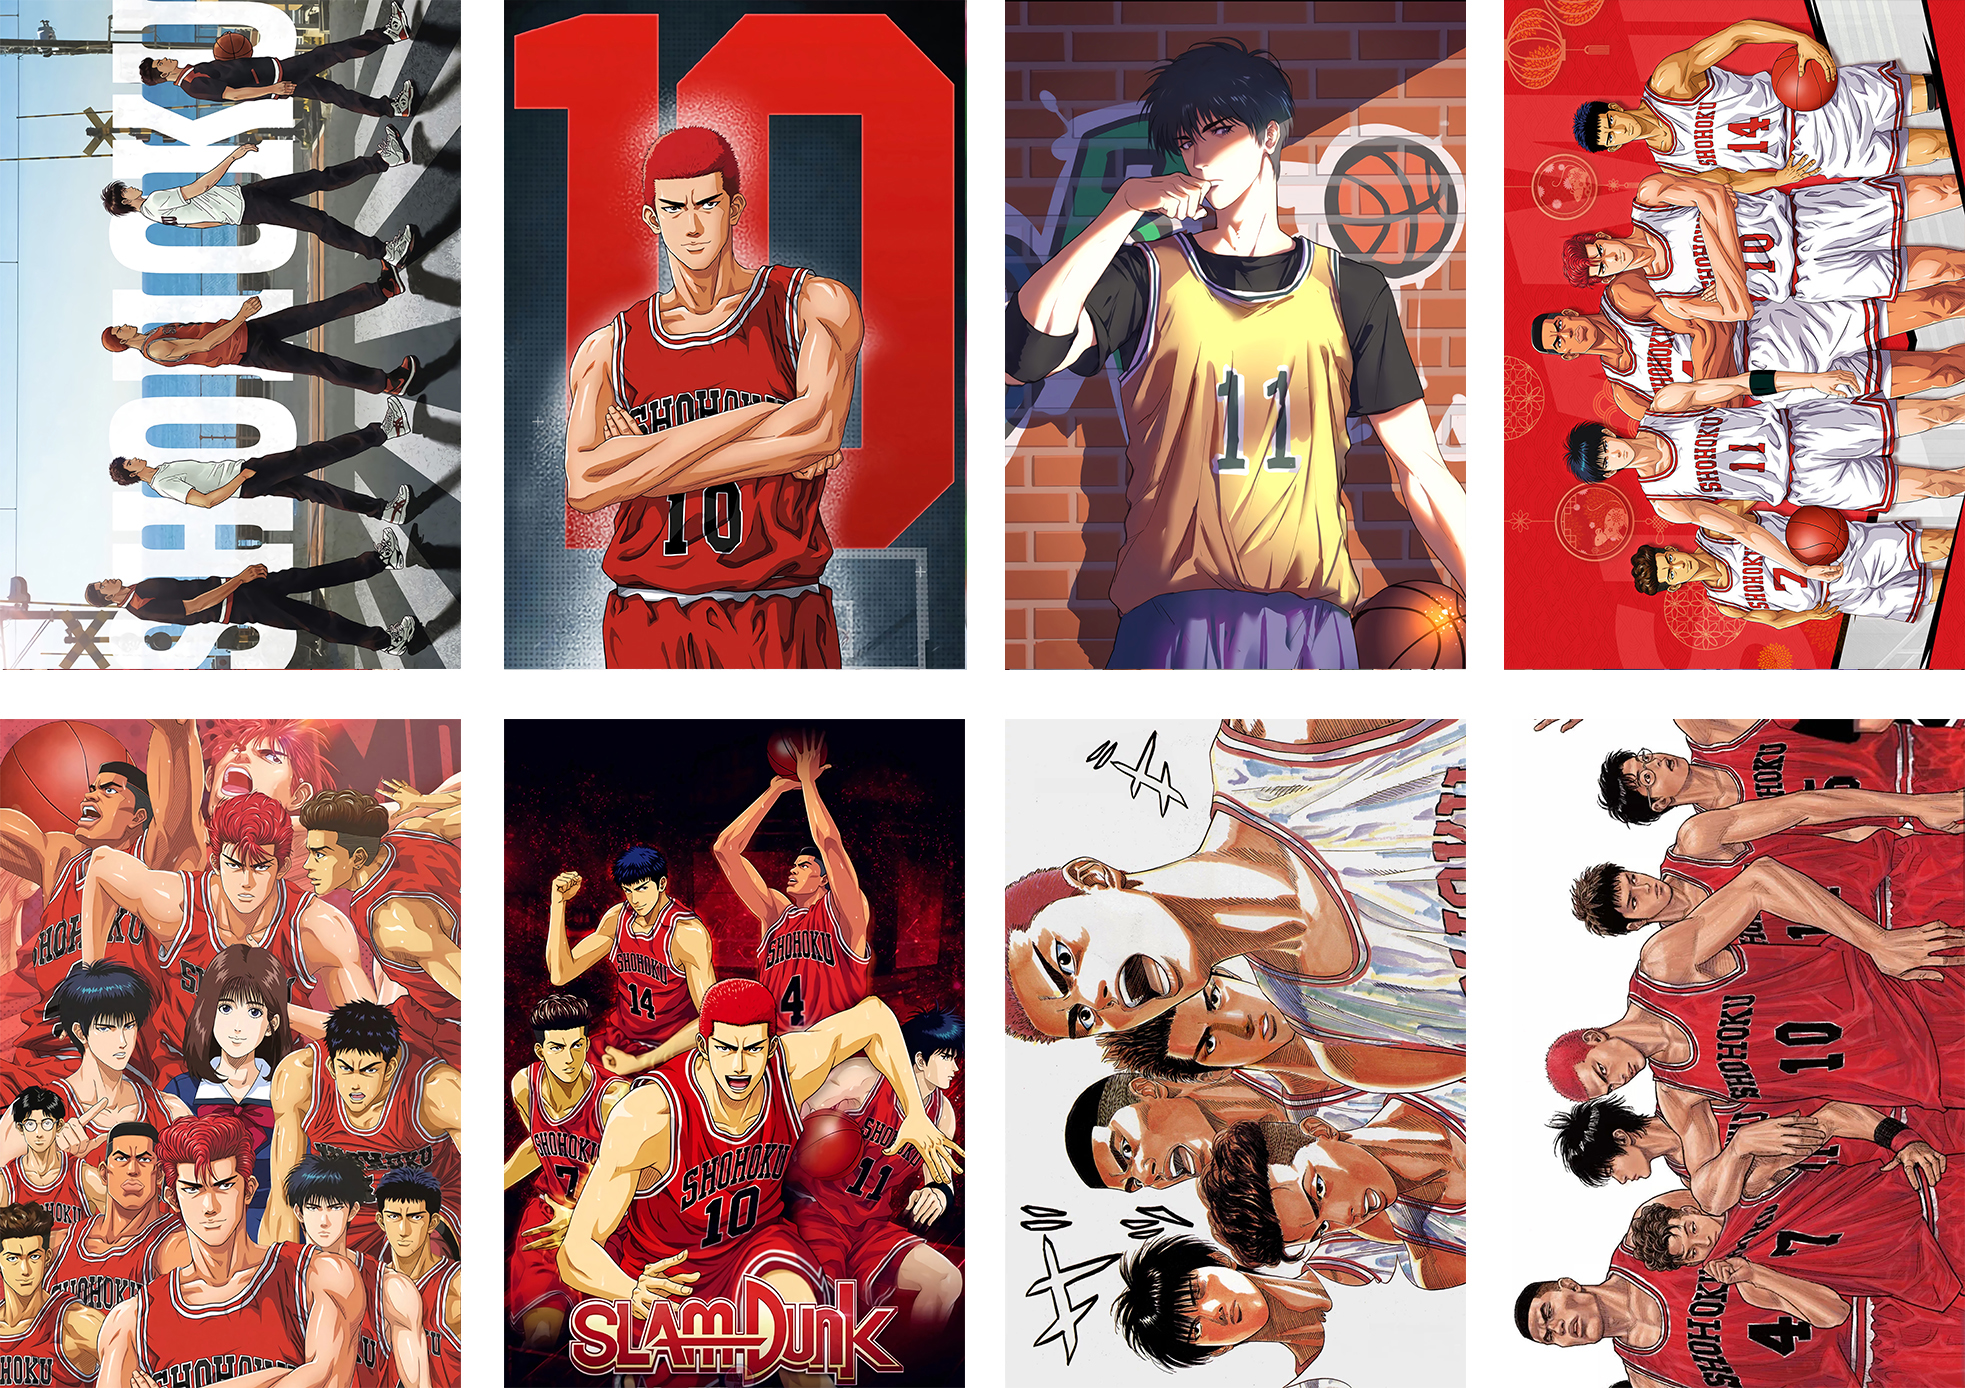 Slam dunk anime posters price for a set of 8 pcs